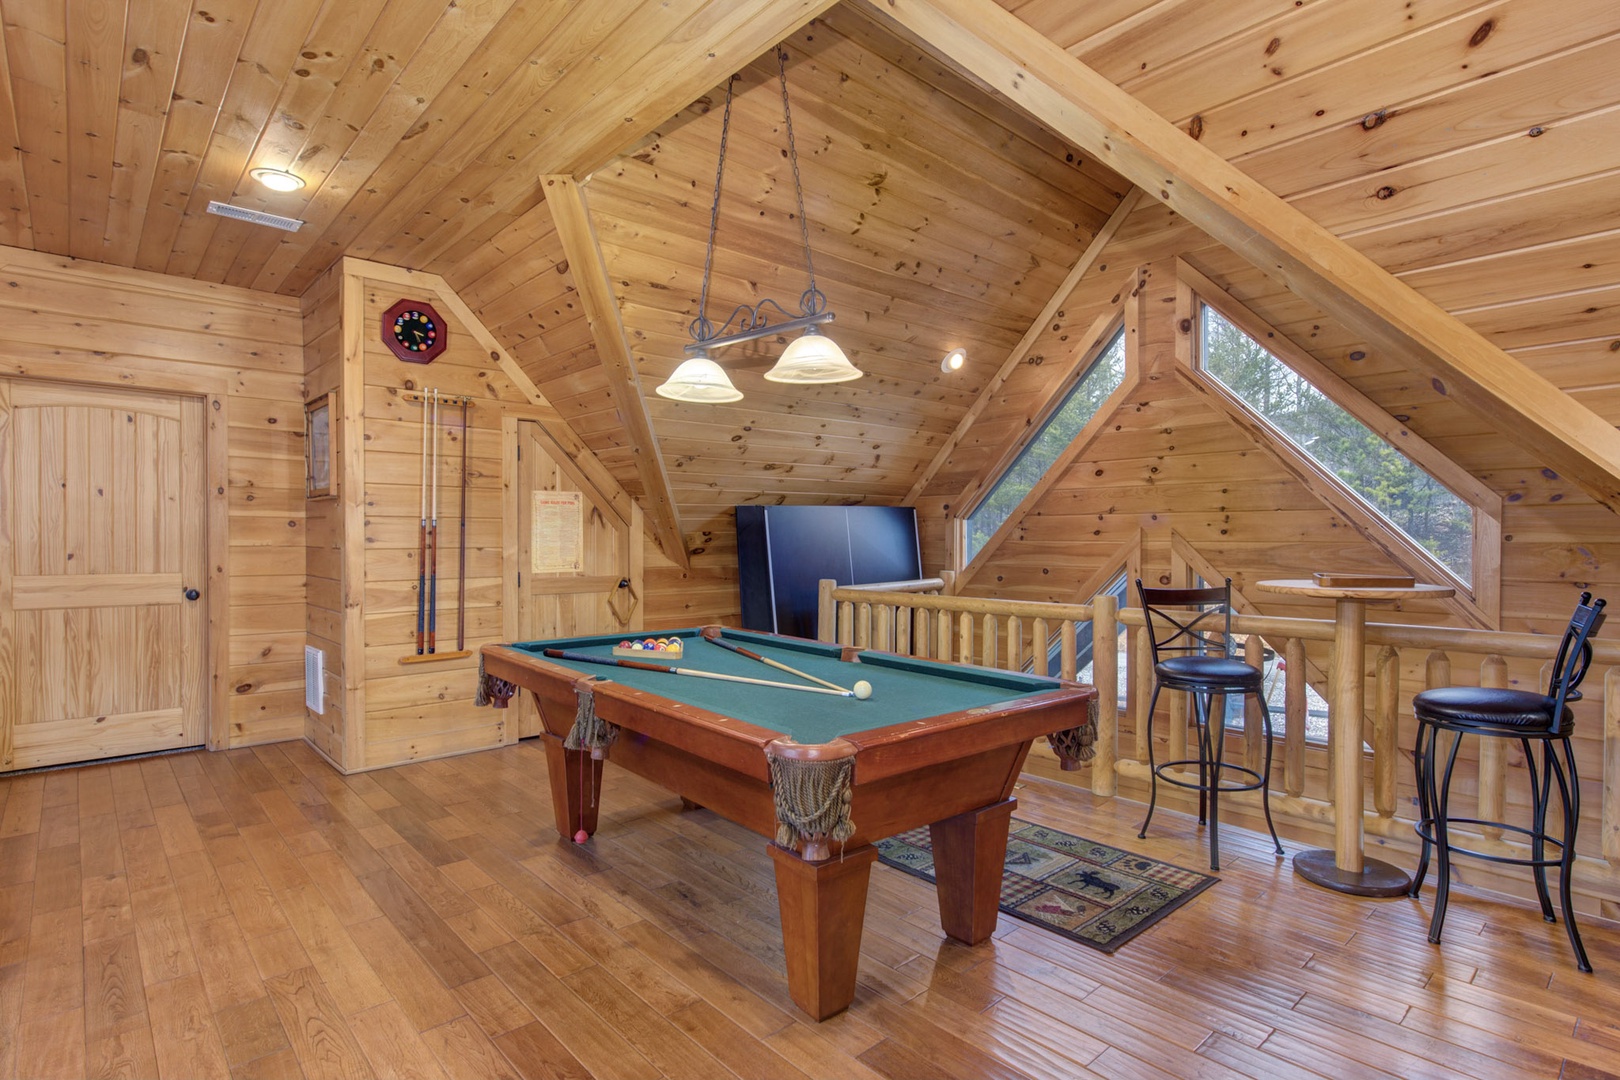 Cue the competitive fun in this loft retreat with a round of pool or ping-pong